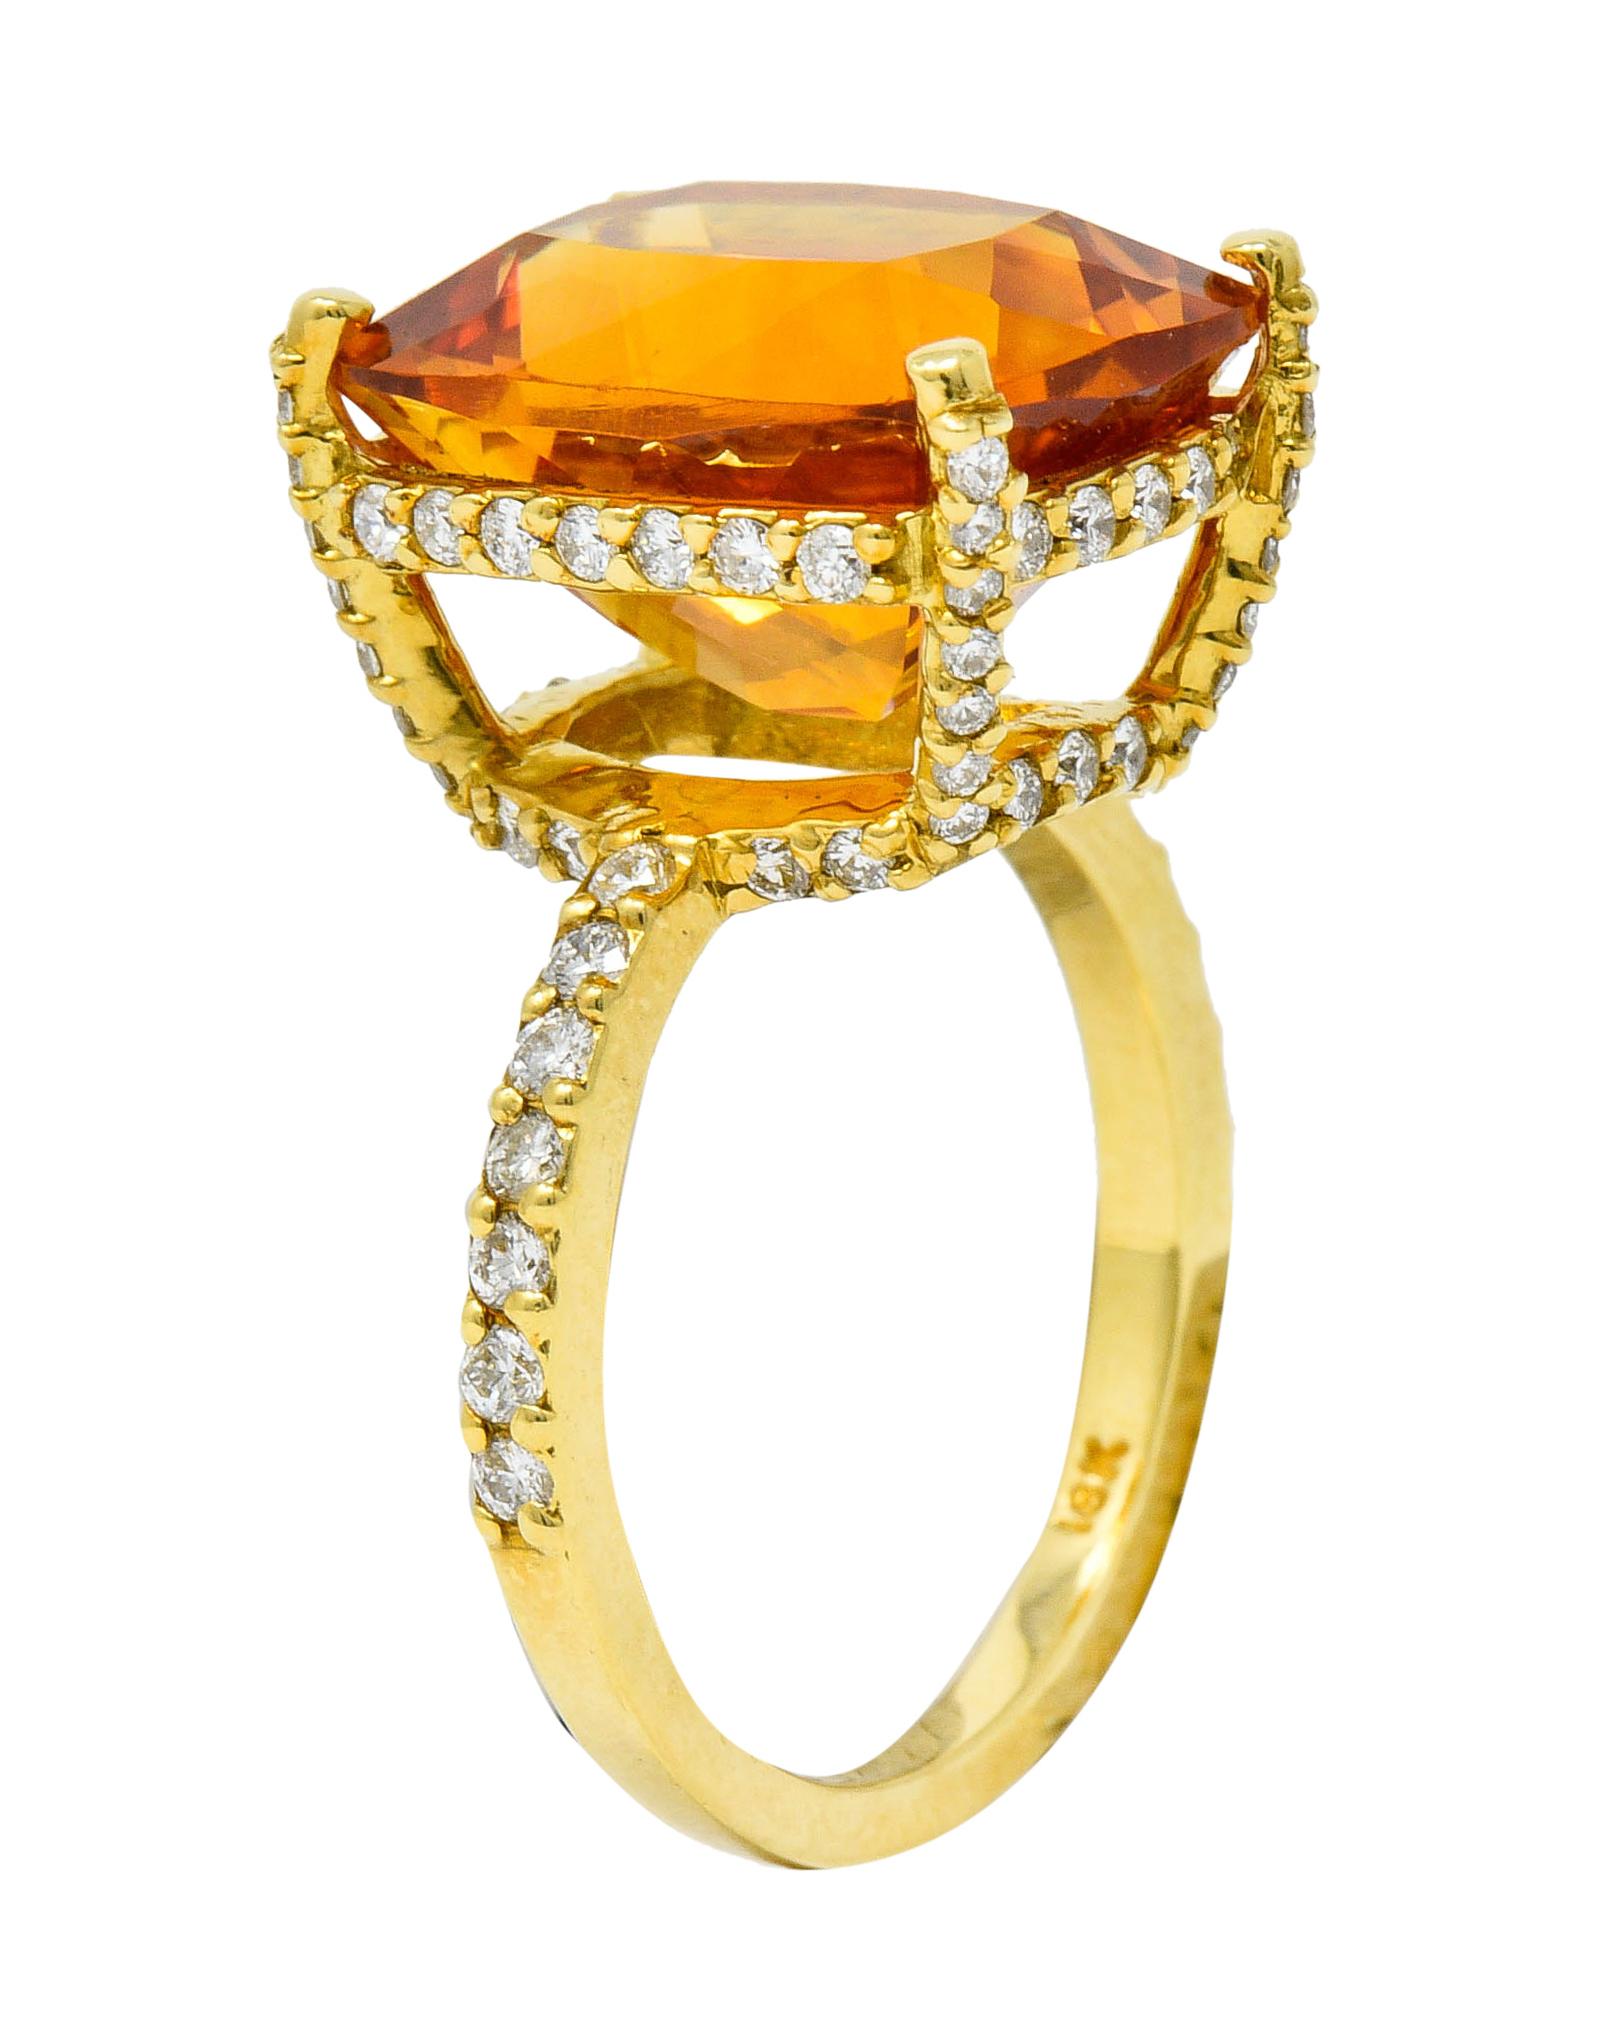 Centering a basket set rectangular checkerboard cut citrine

An incredibly saturated orange color and measures approximately 14.0 x 12.0 mm

Accented throughout by round brilliant cut diamonds weighing in total approximately 1.90 carats; G/H color